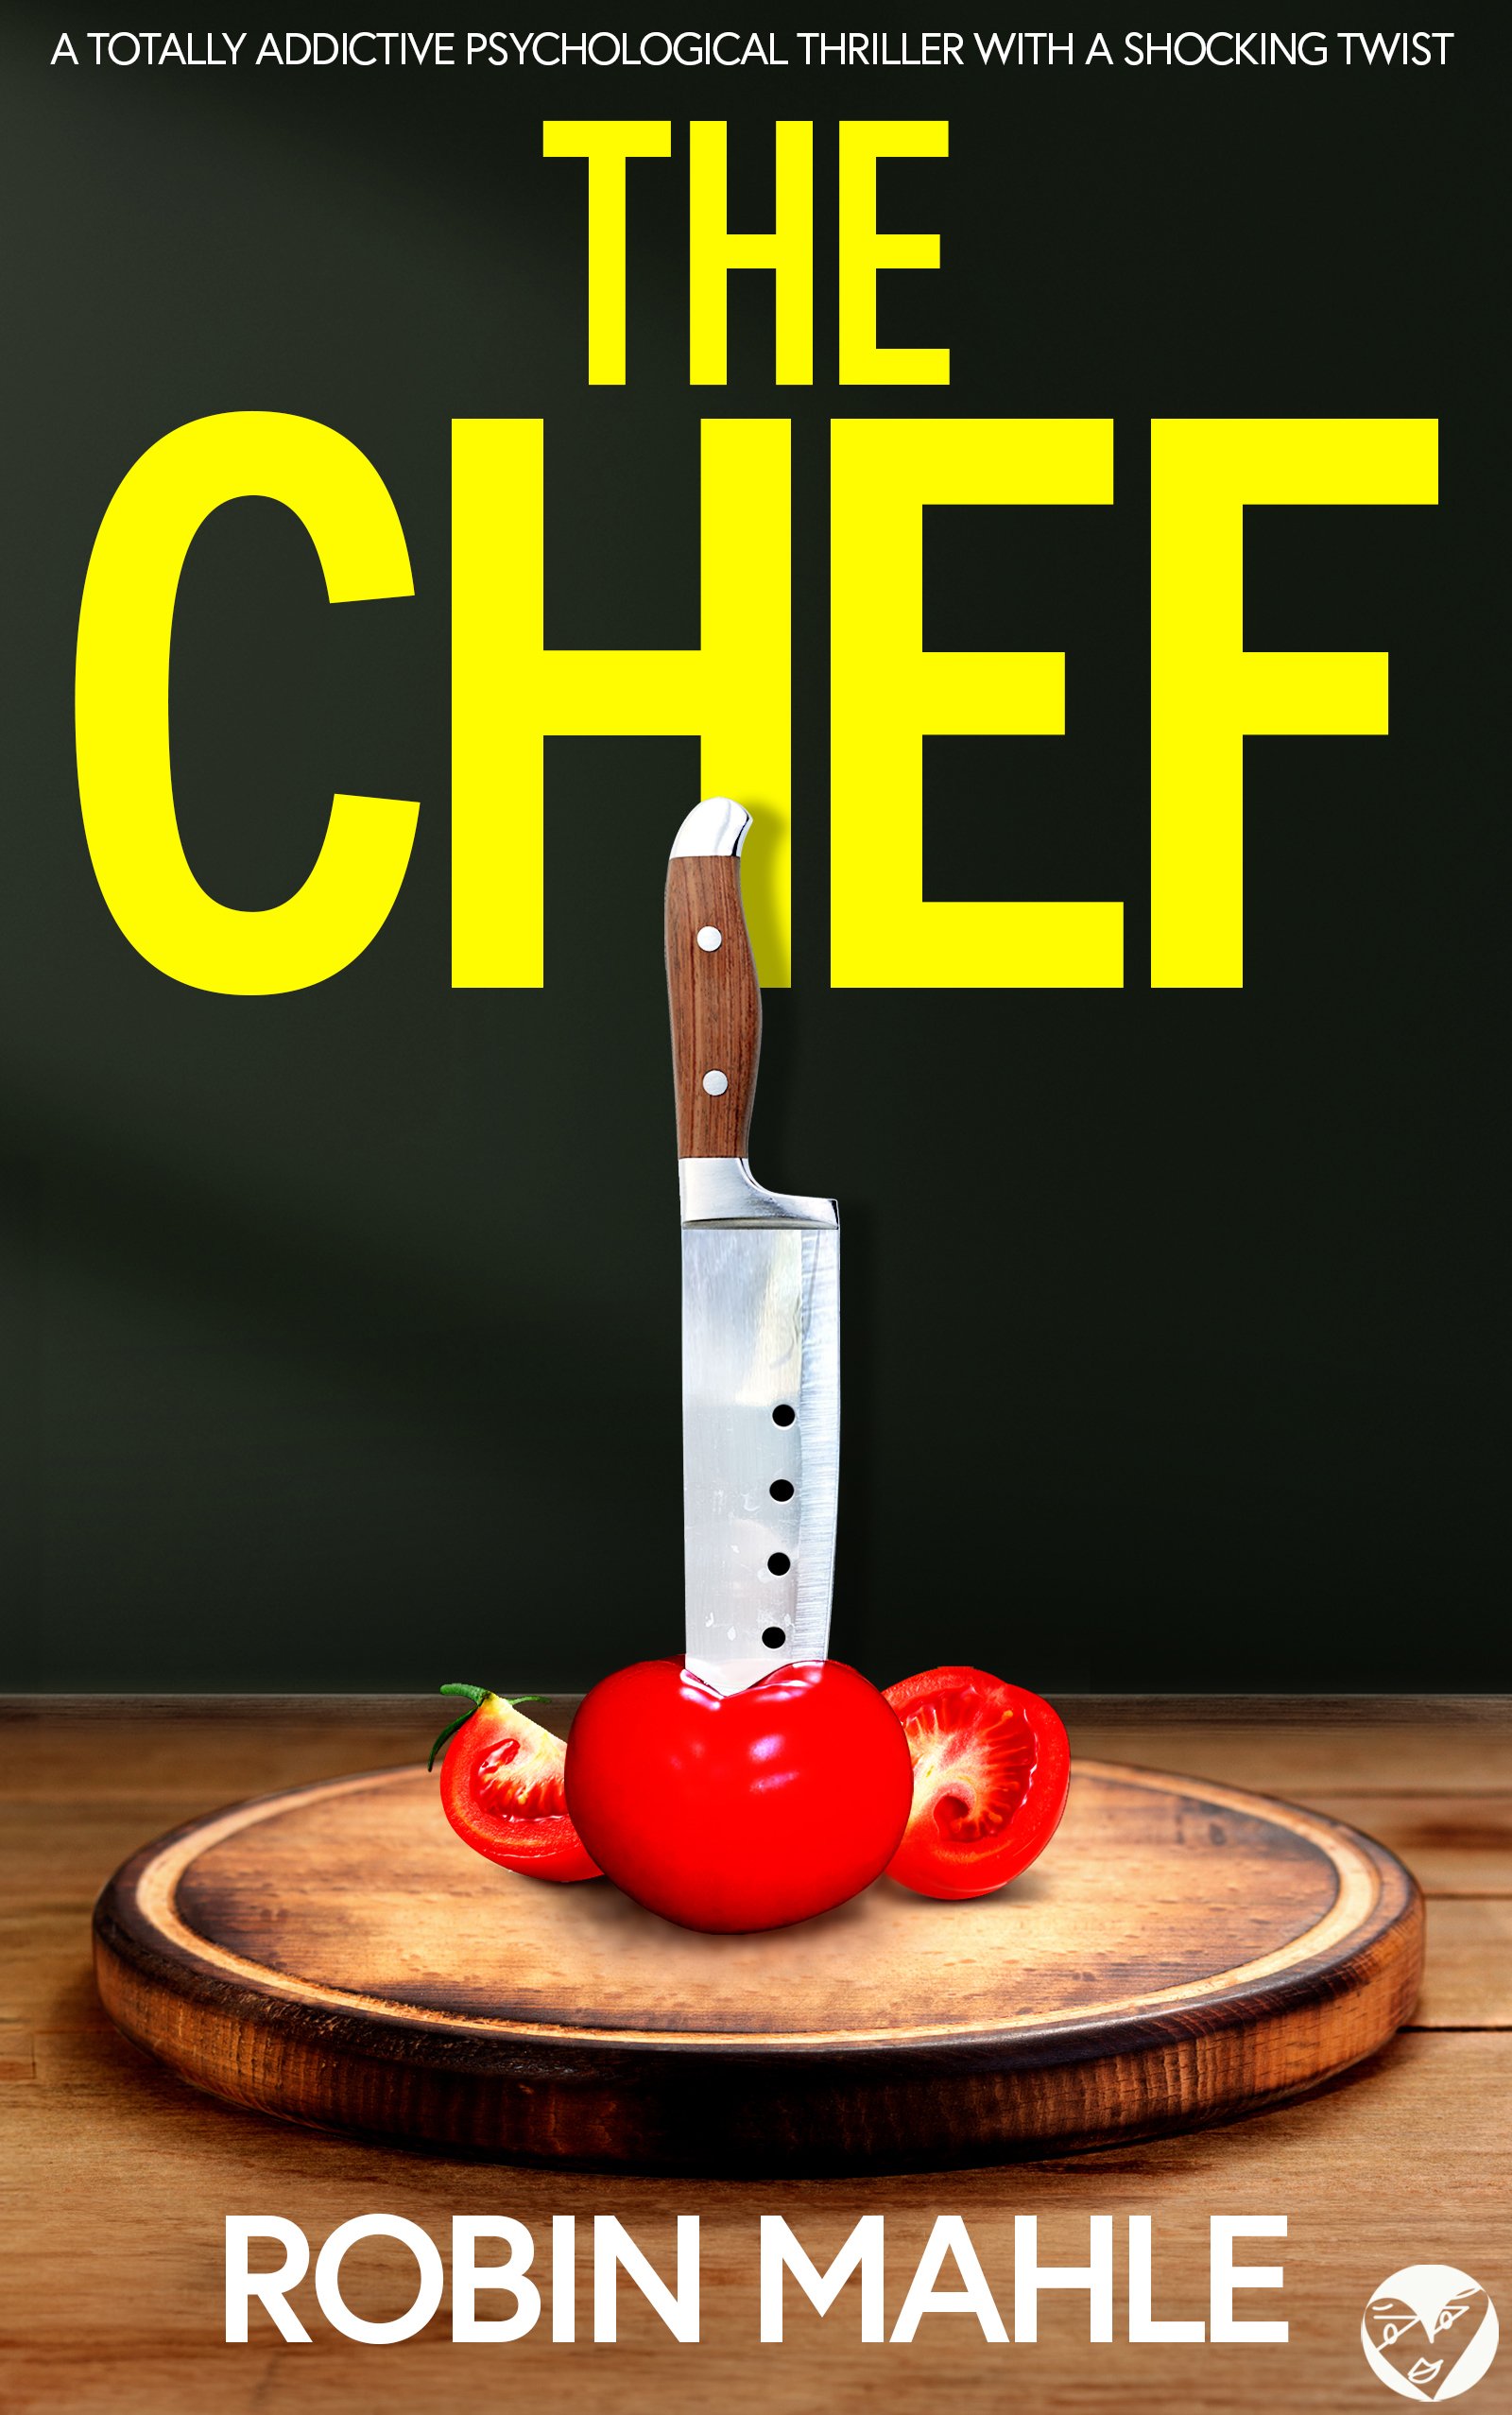 THE CHEF cover publish.jpg